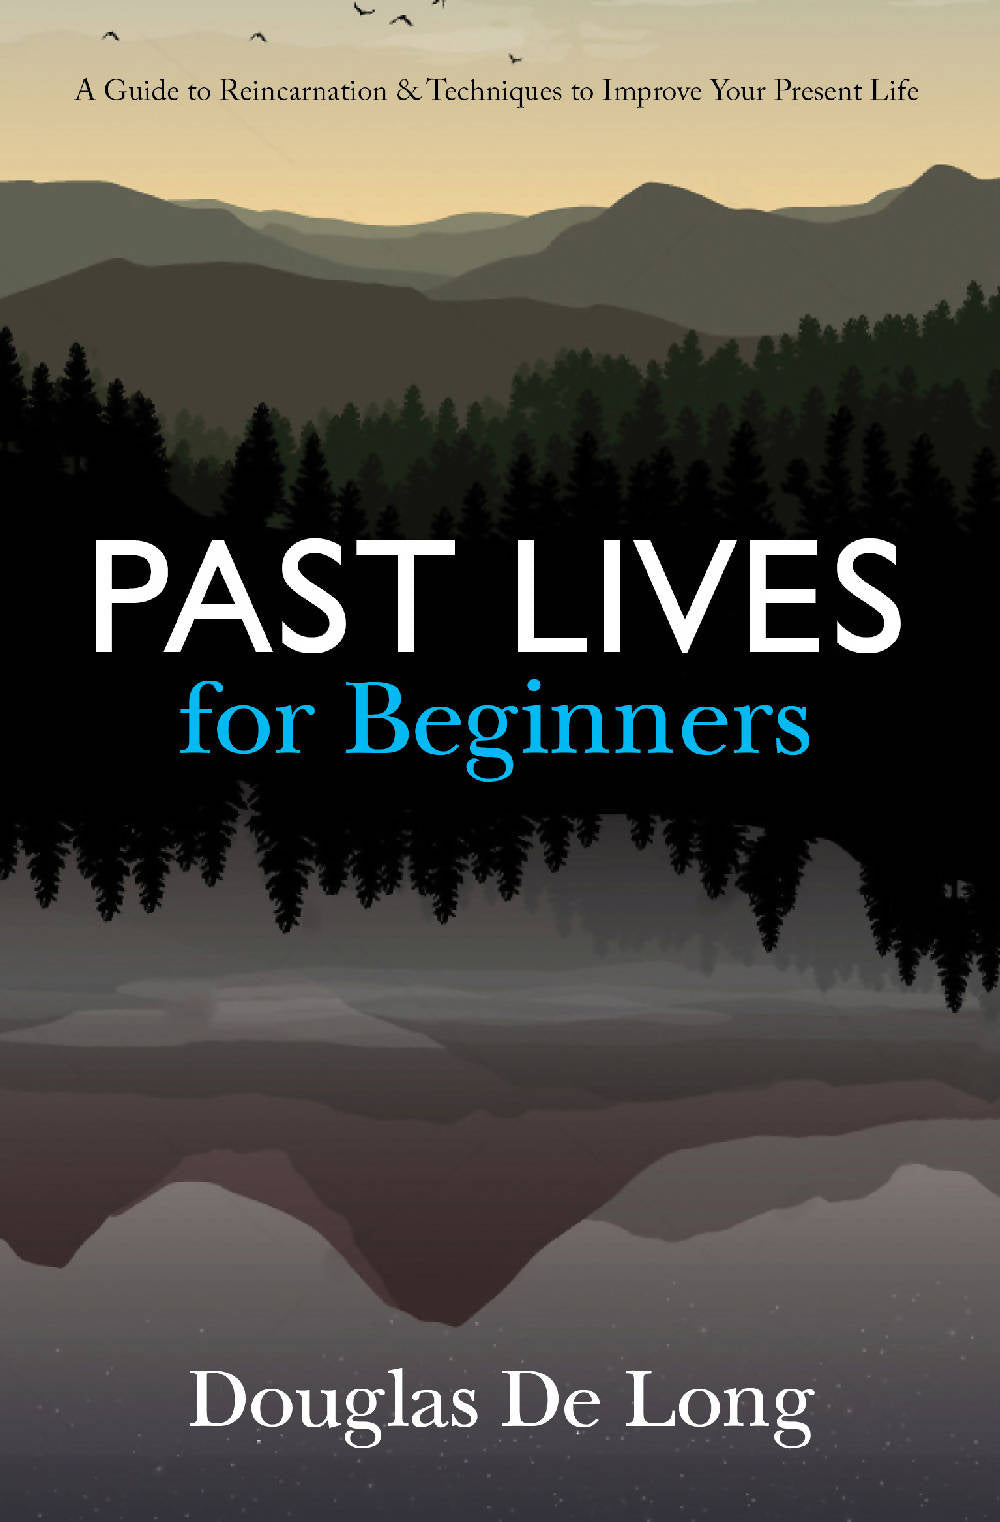 Past Lives For Beginners